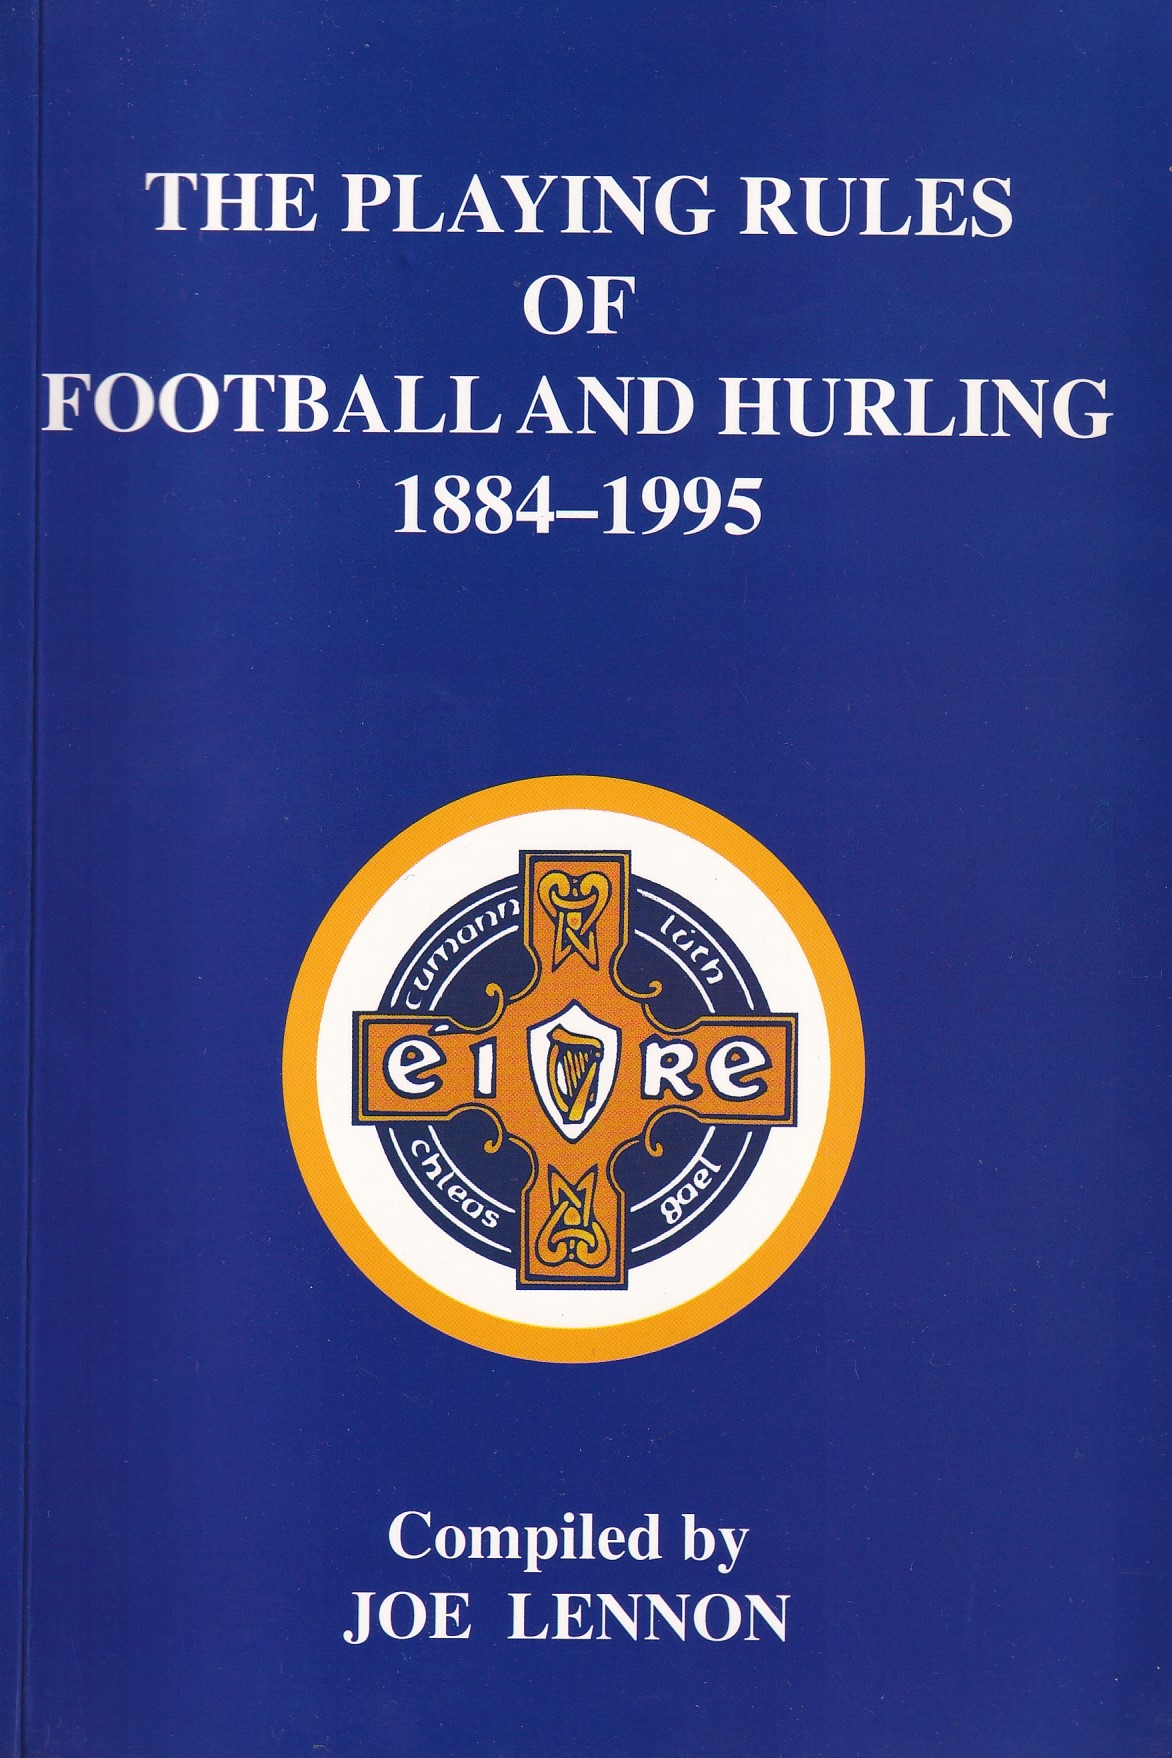 The Playing Rules of Football and Hurling 1884-1995 [SIGNED] by Joe Lennon